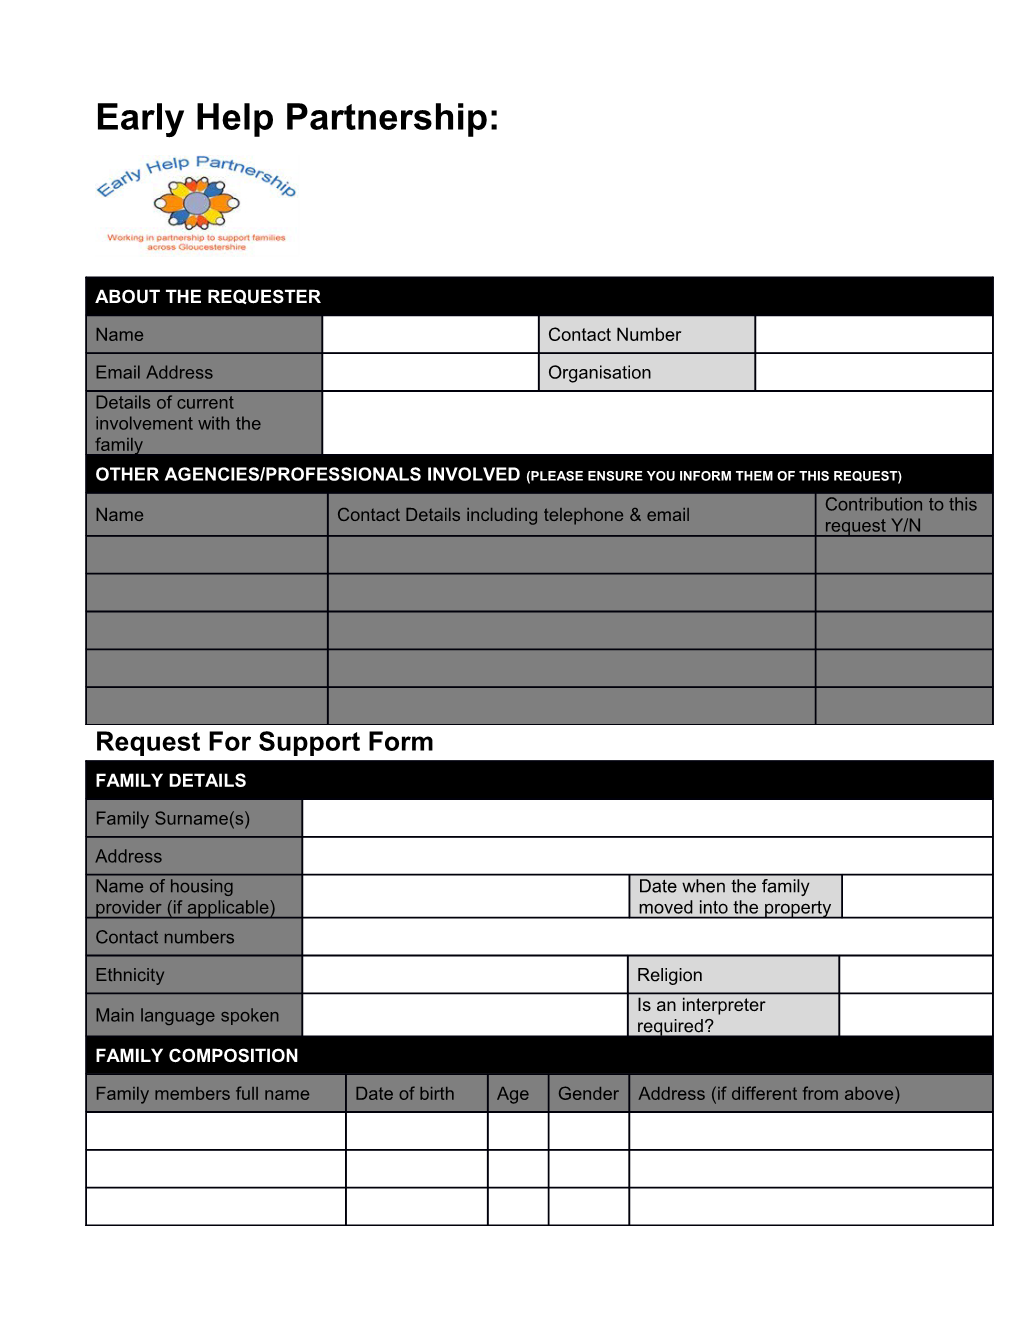 Request for Support Form